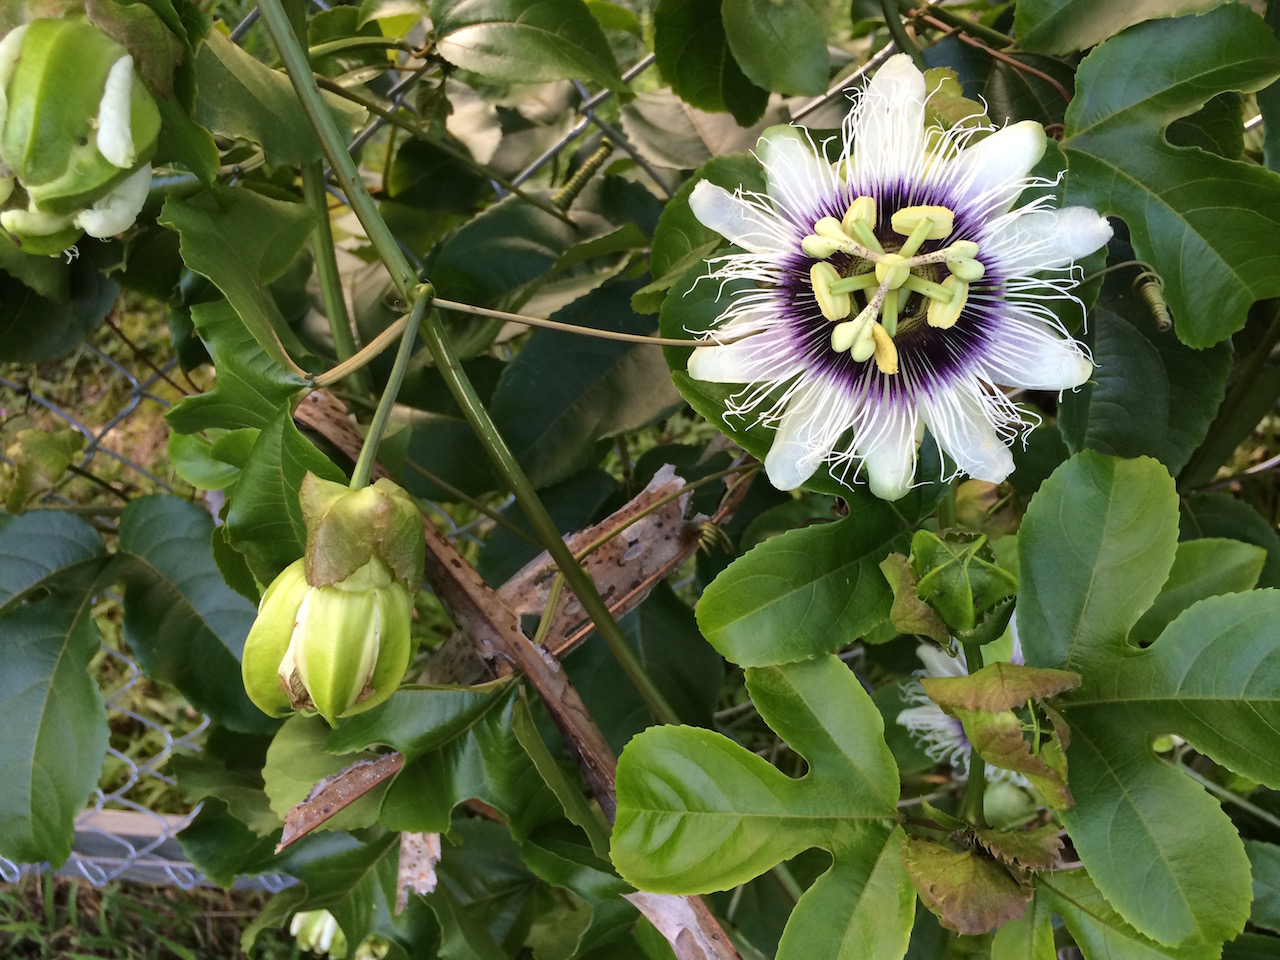 Lilikoi (passion) flower on fence by Judy K. Walker